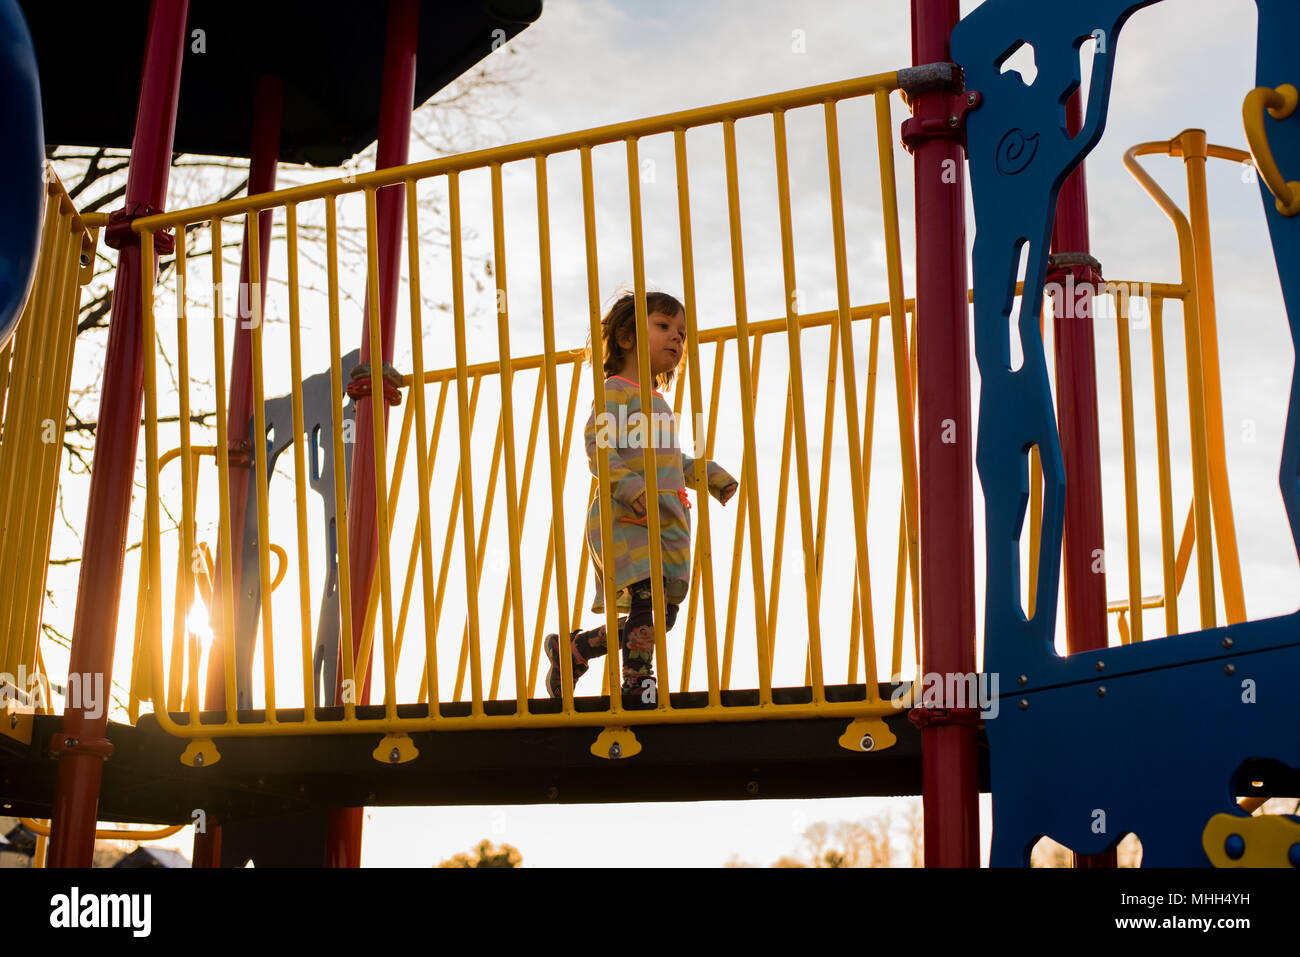 A toddler girl runs across playground equipment on a sunny day. Stock Photo